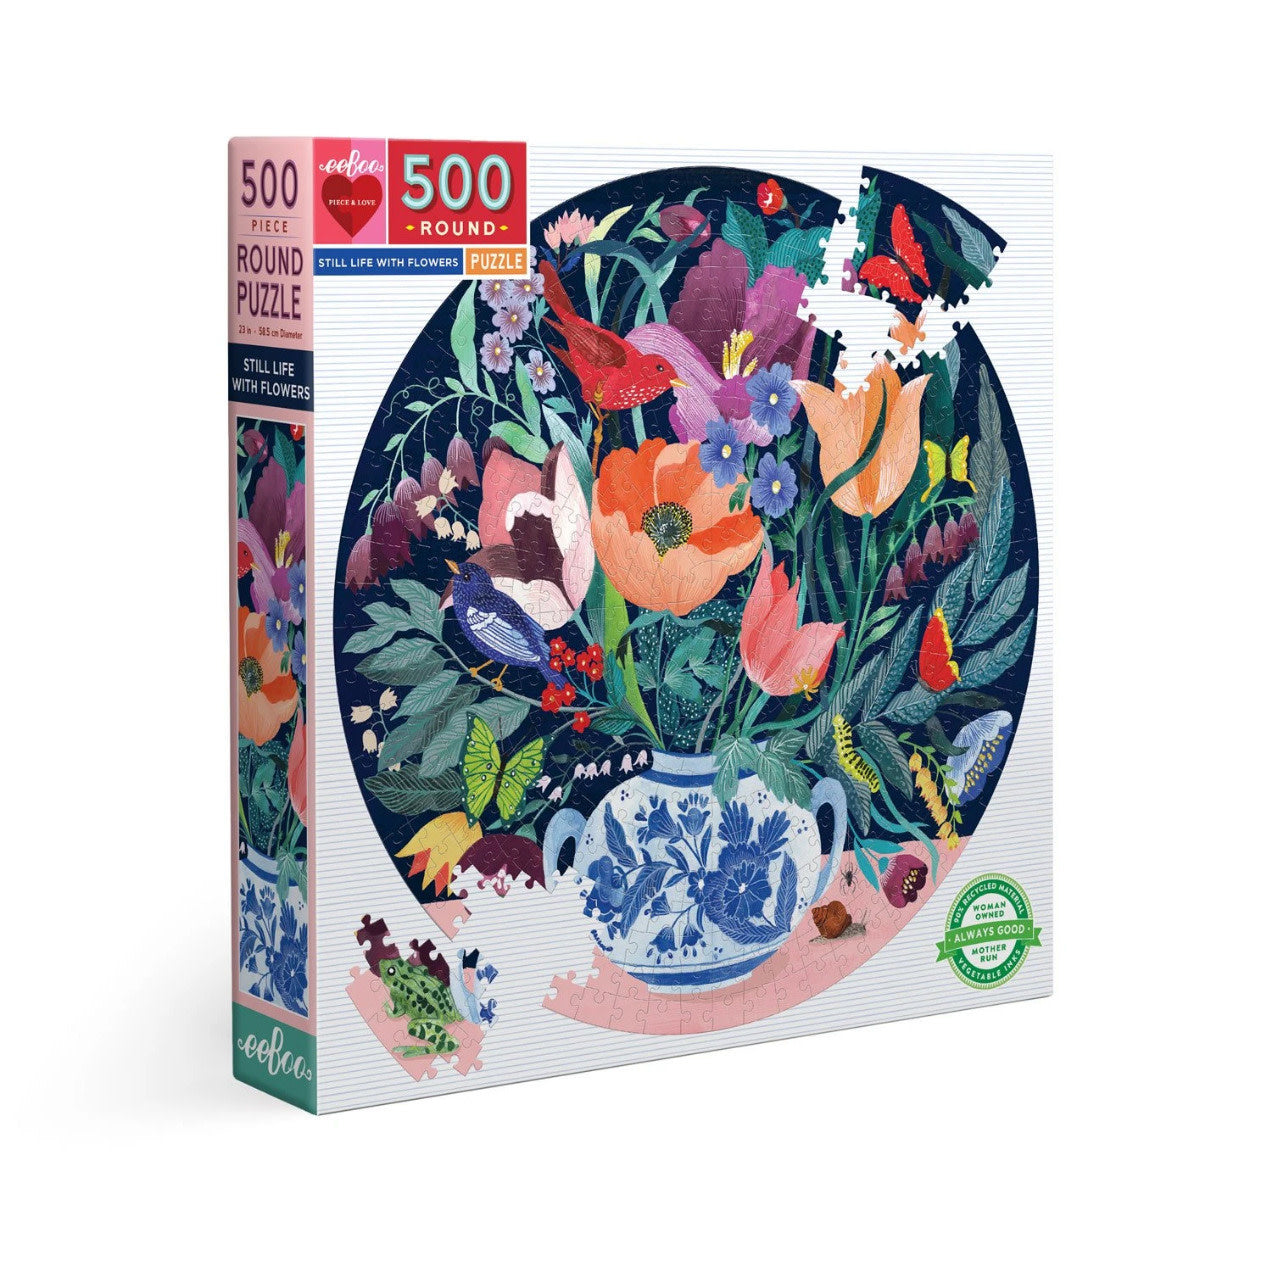 Still Life with Flowers 500 PC Round Puzzle